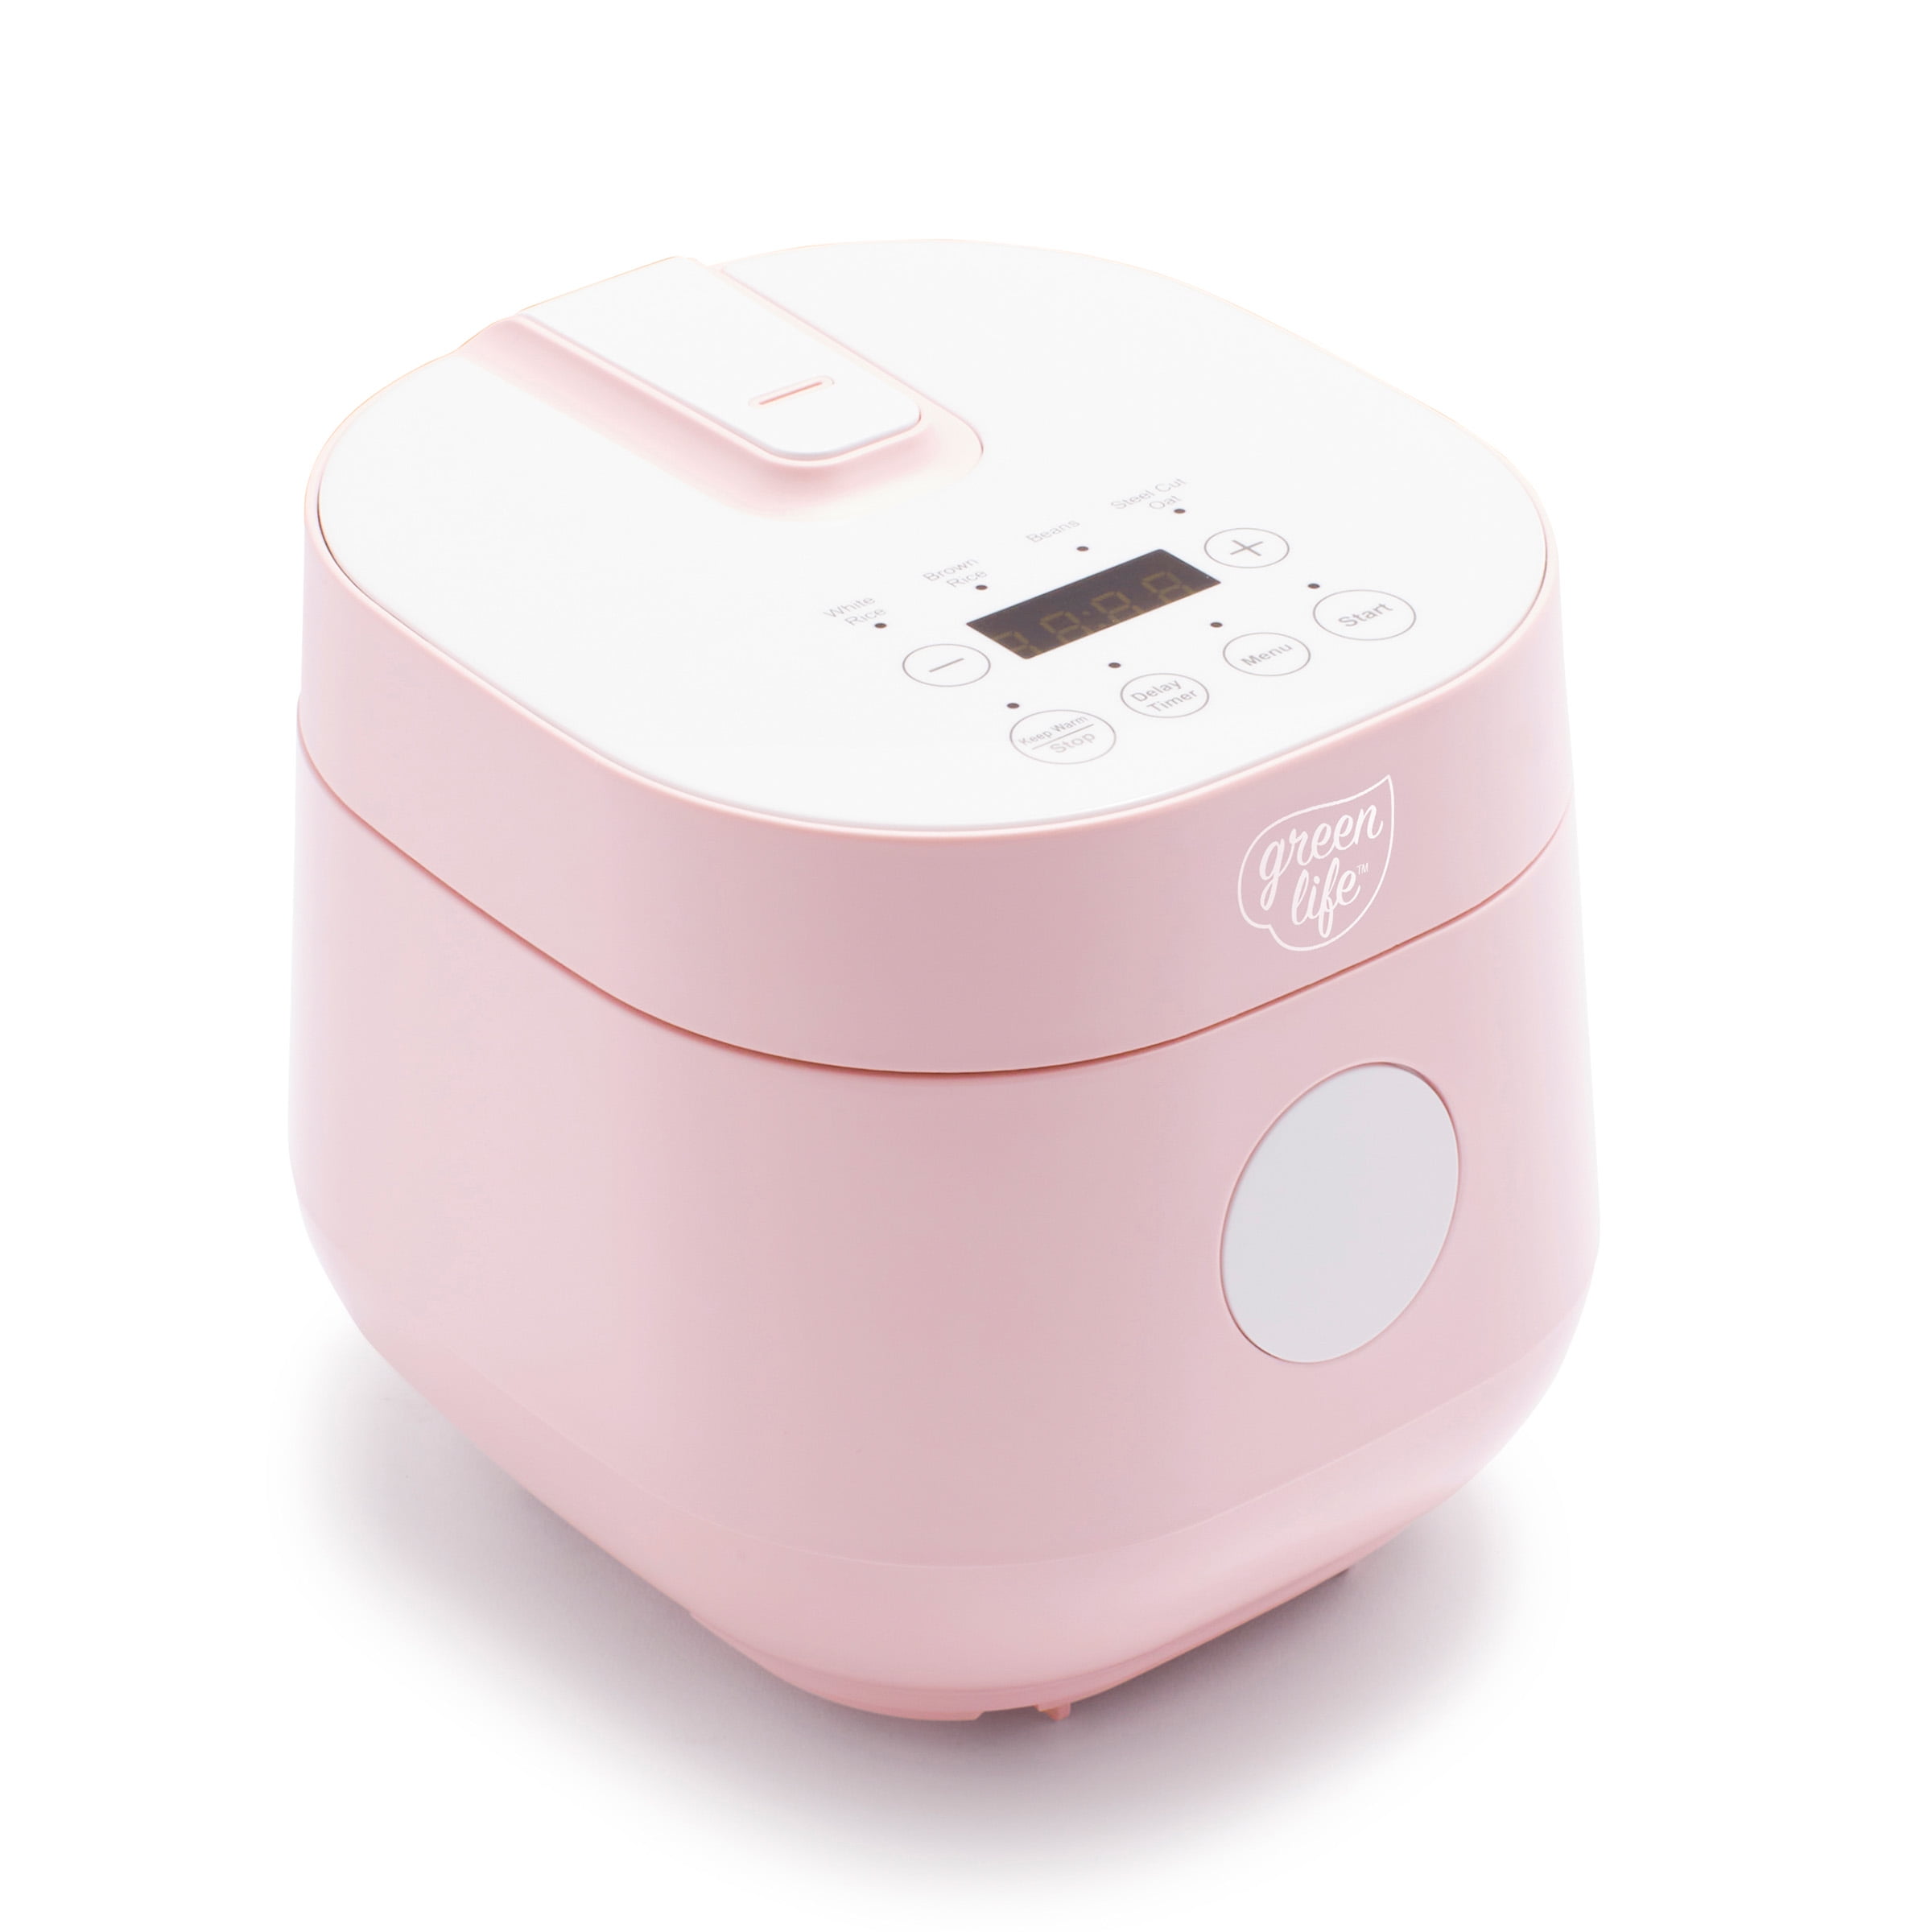 Mini Rice Cooker 1-1.5 Cups Uncooked(3 Cups Cooked), Rice Cooker Small with  Bento Box, Removable Nonstick Pot, One Touch&Keep Warm Function, Portable